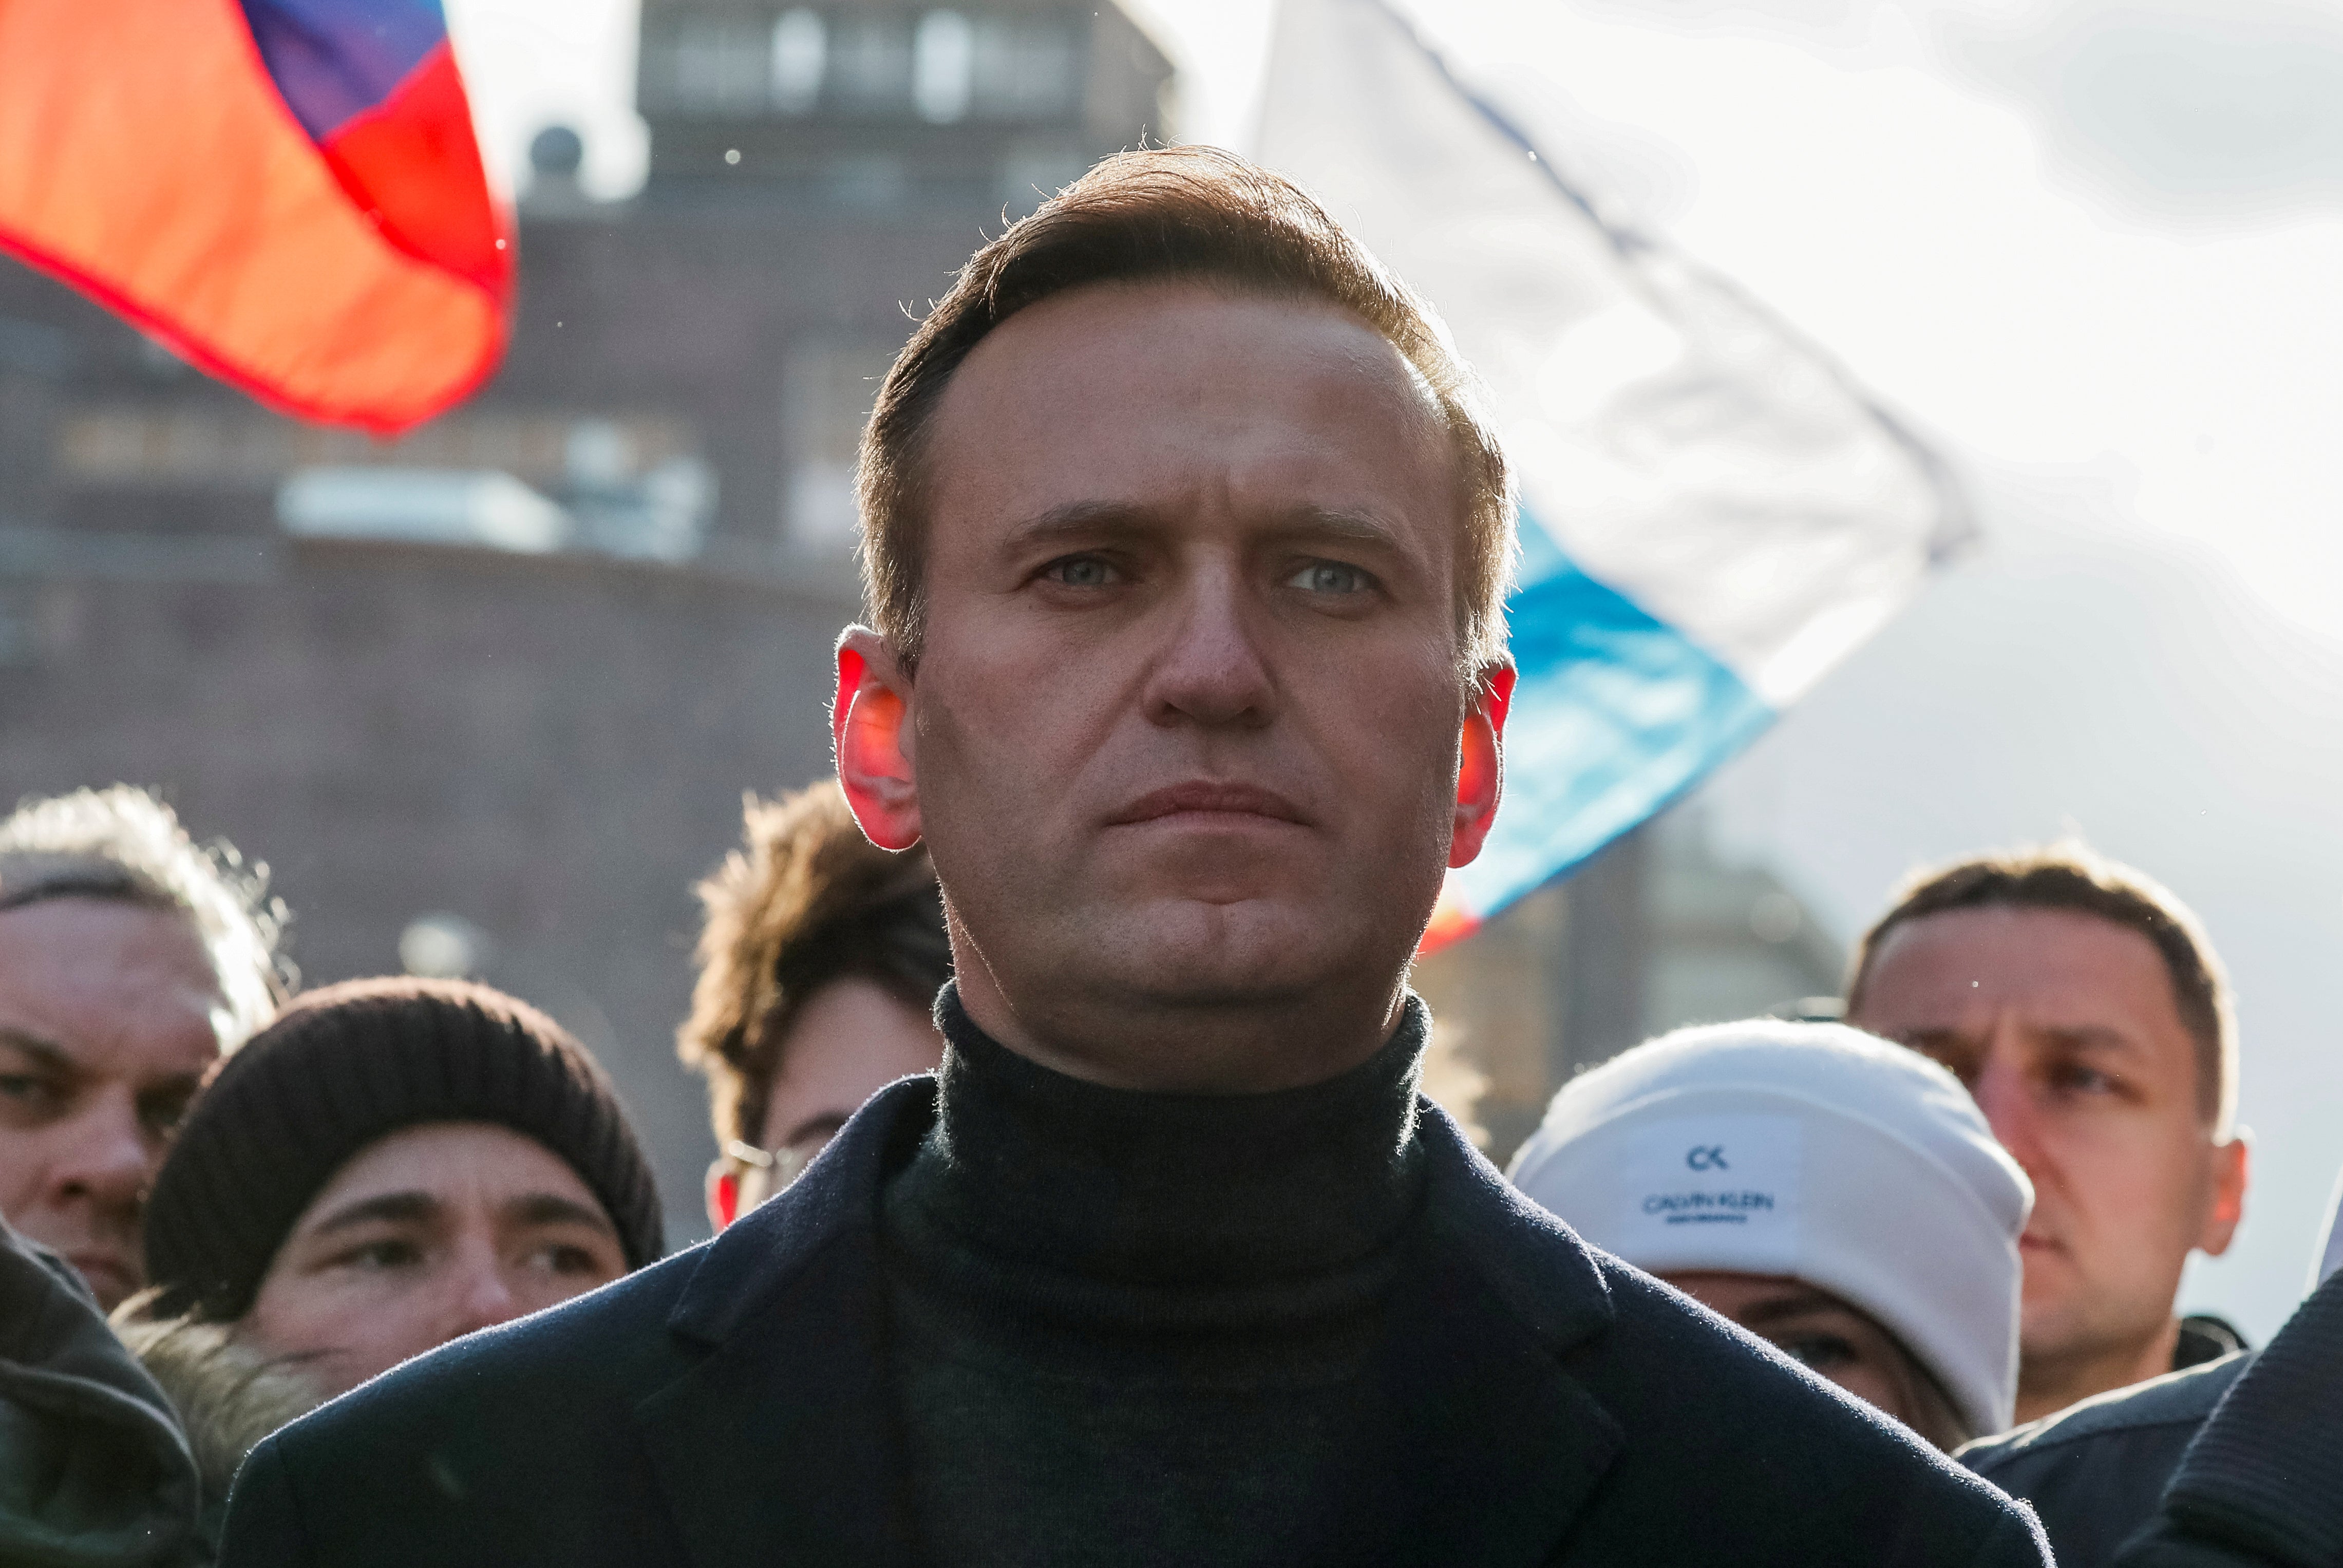 Alexei Navalny fell ill on 20 August and was in a coma for weeks